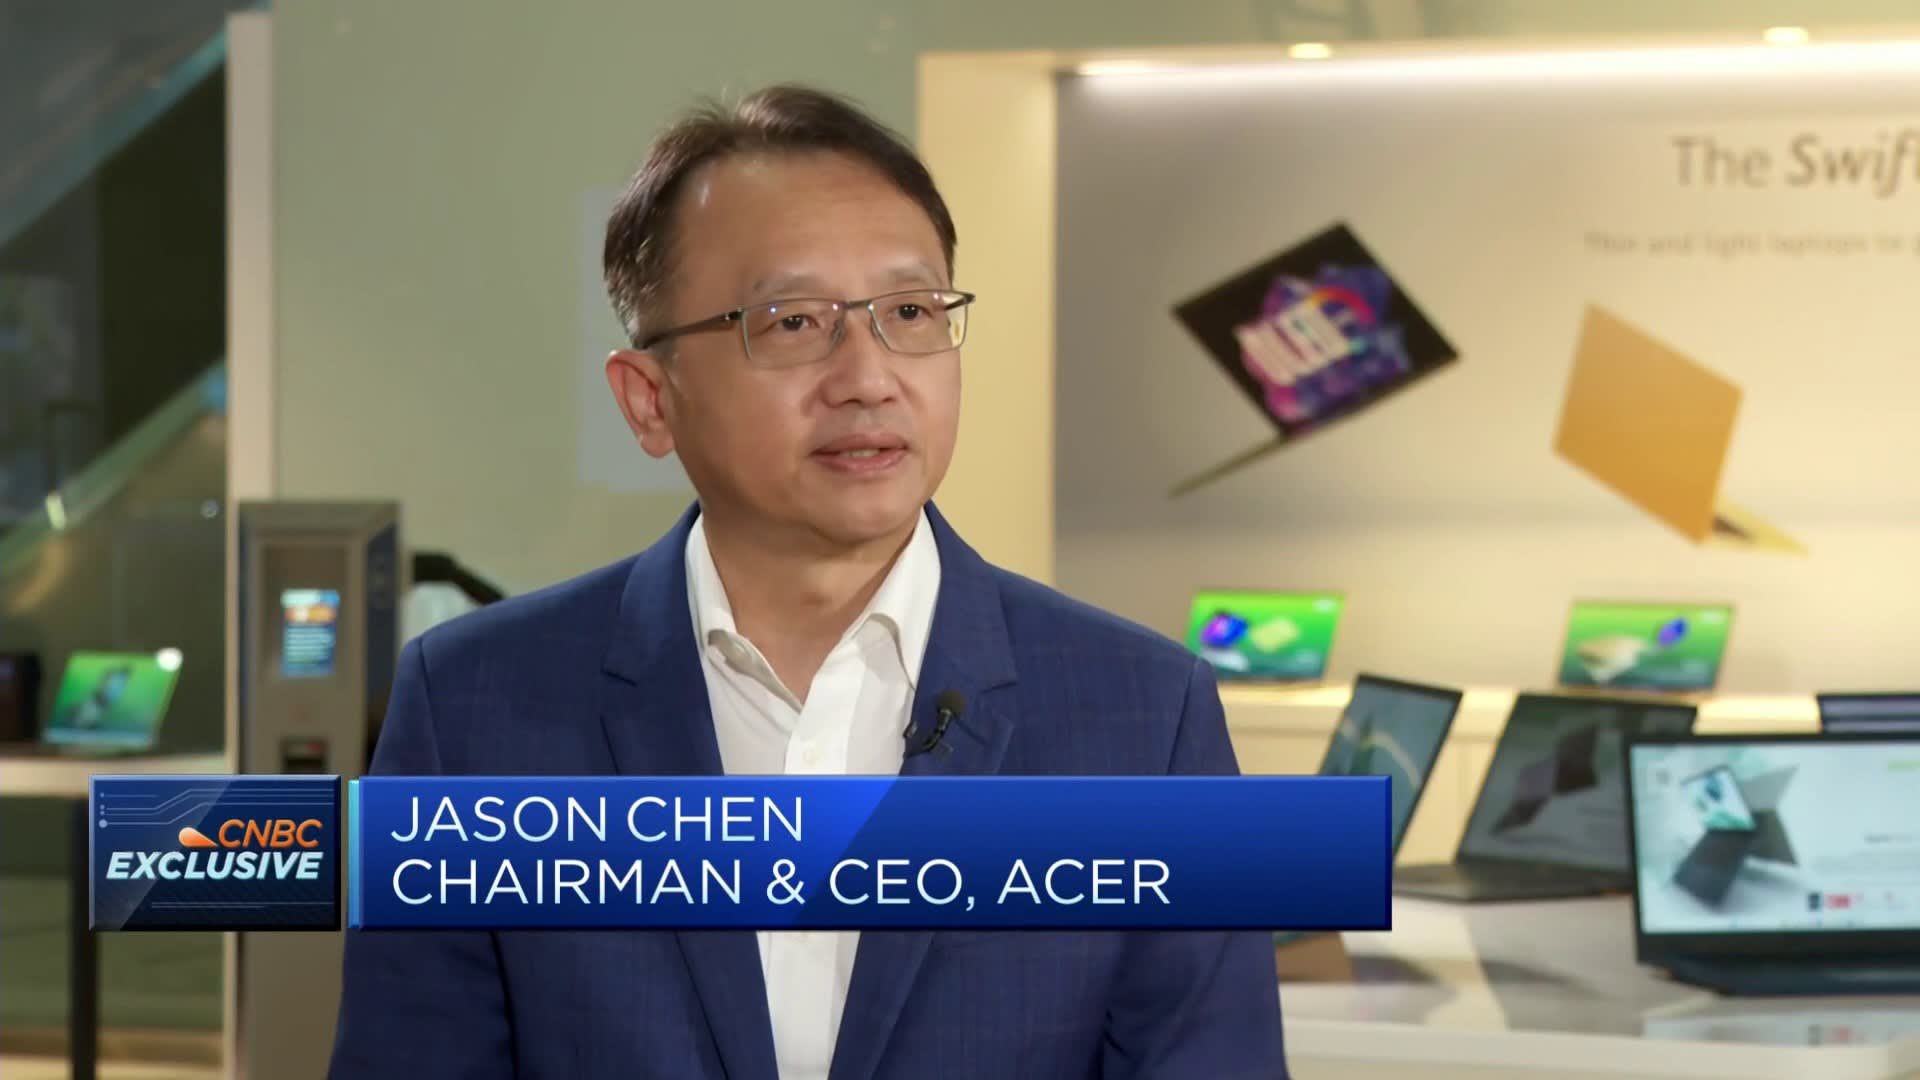 PC demand is picking up, says Acer CEO